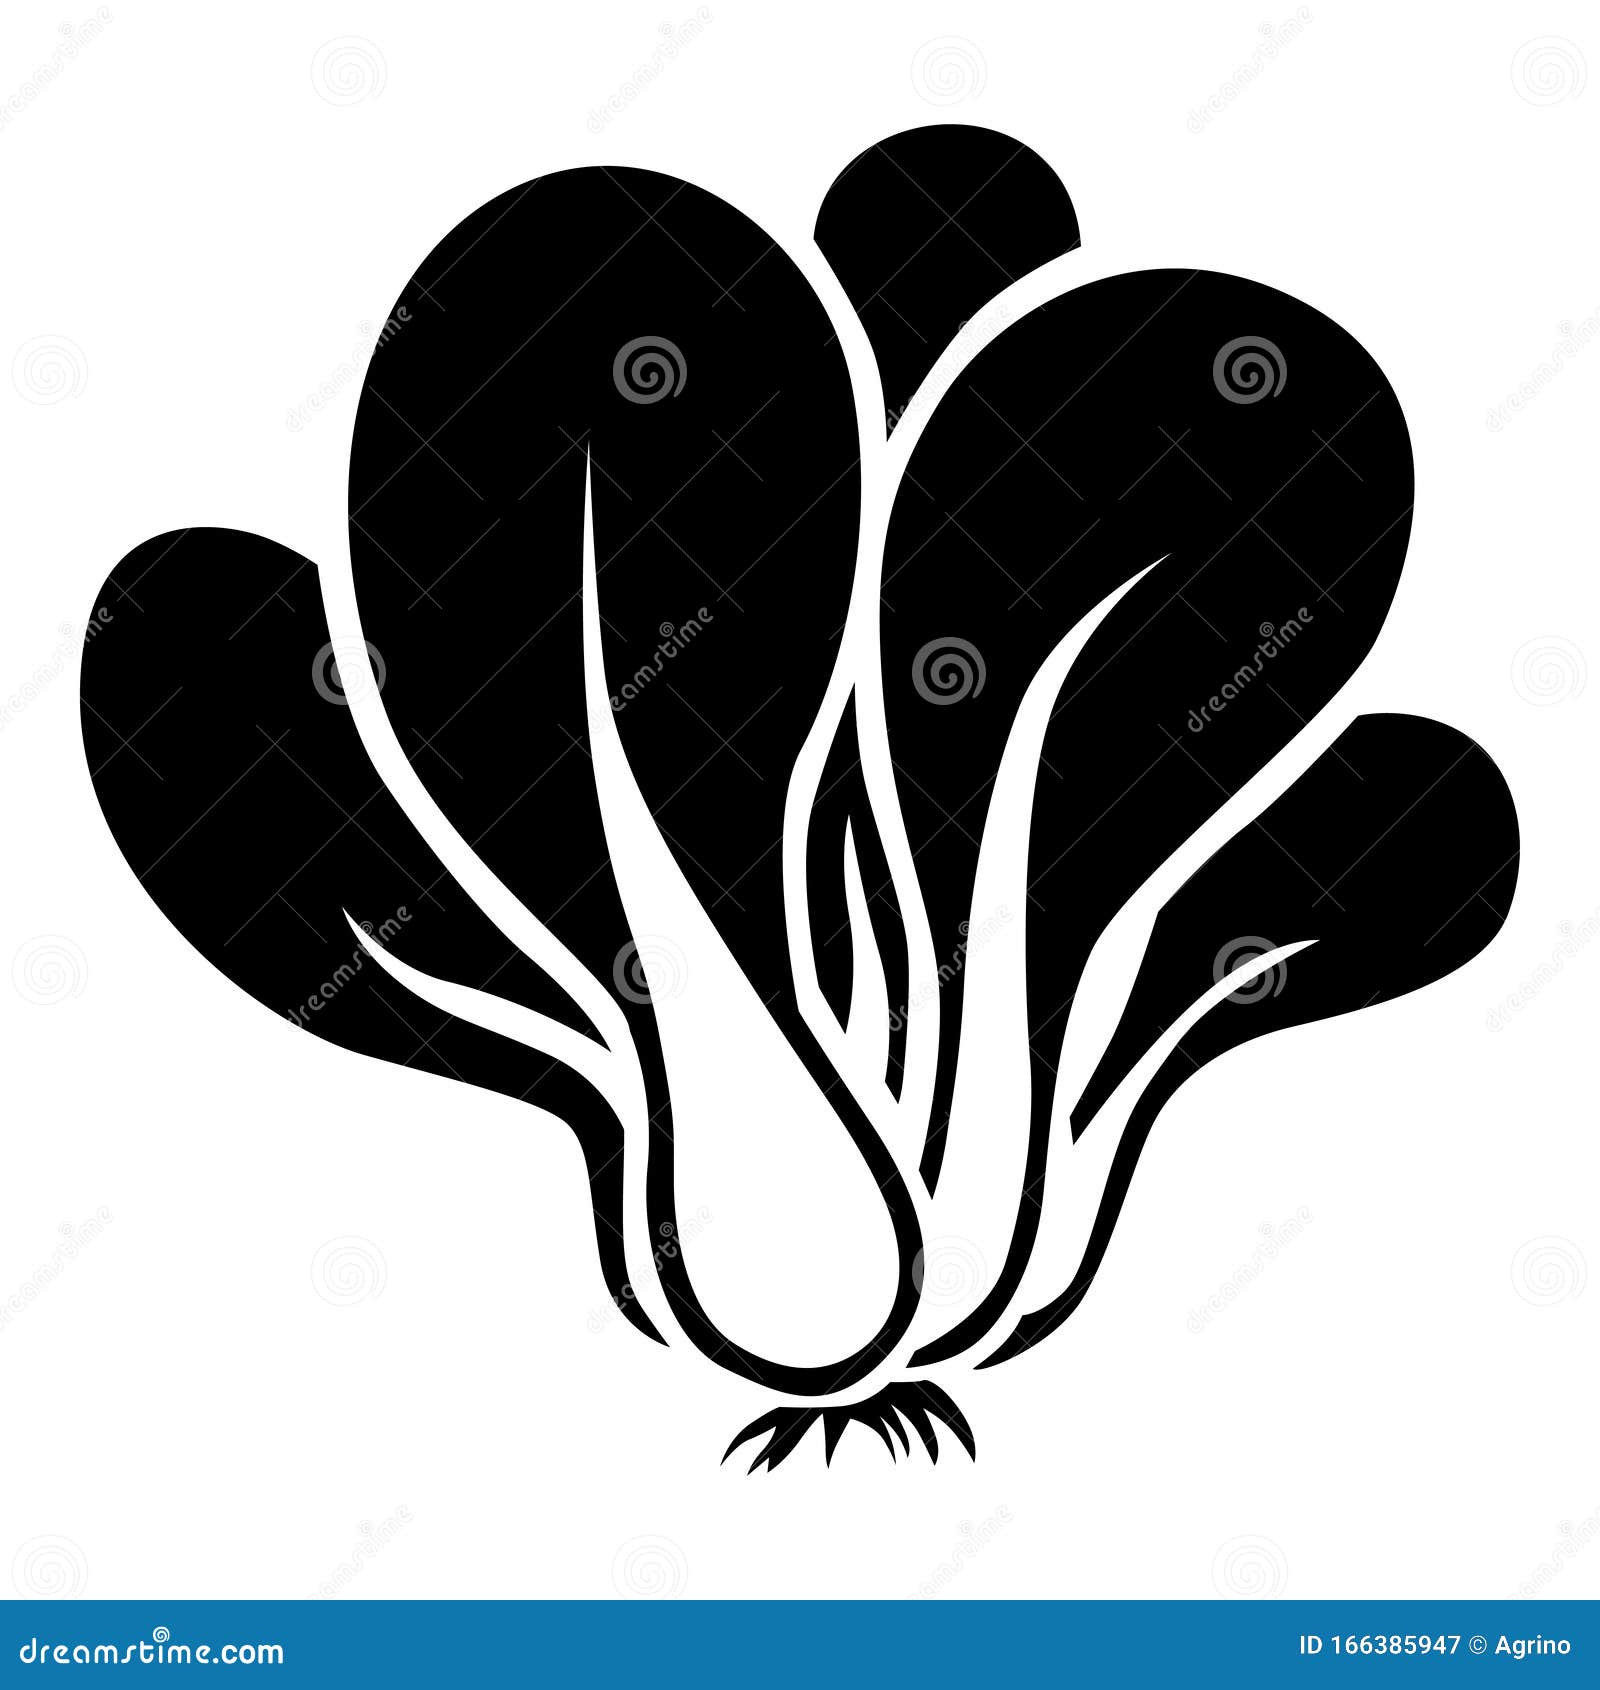 leaf cabbage pak choy silhouette icon